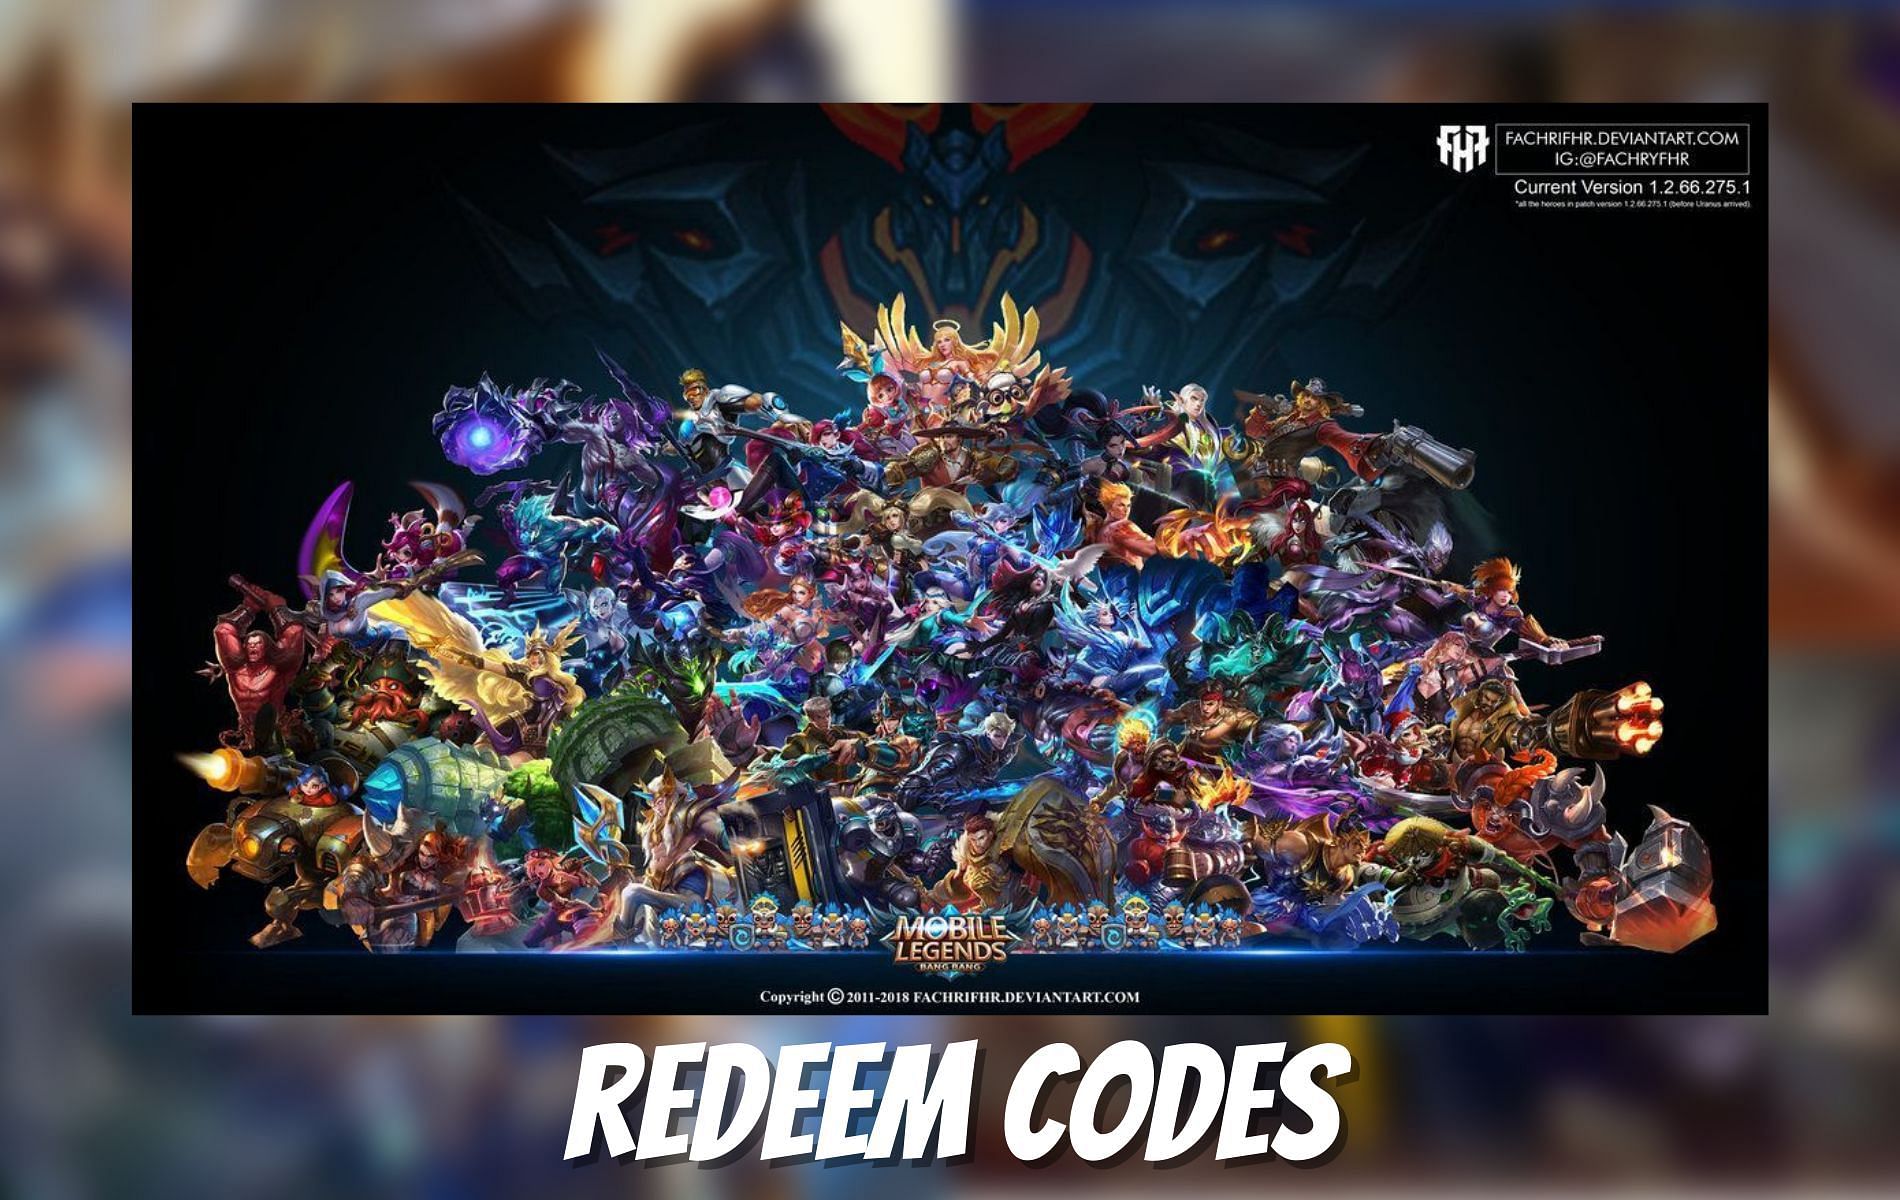 Redeem codes can provide players with a competitive advantage (Image via Sportskeeda)